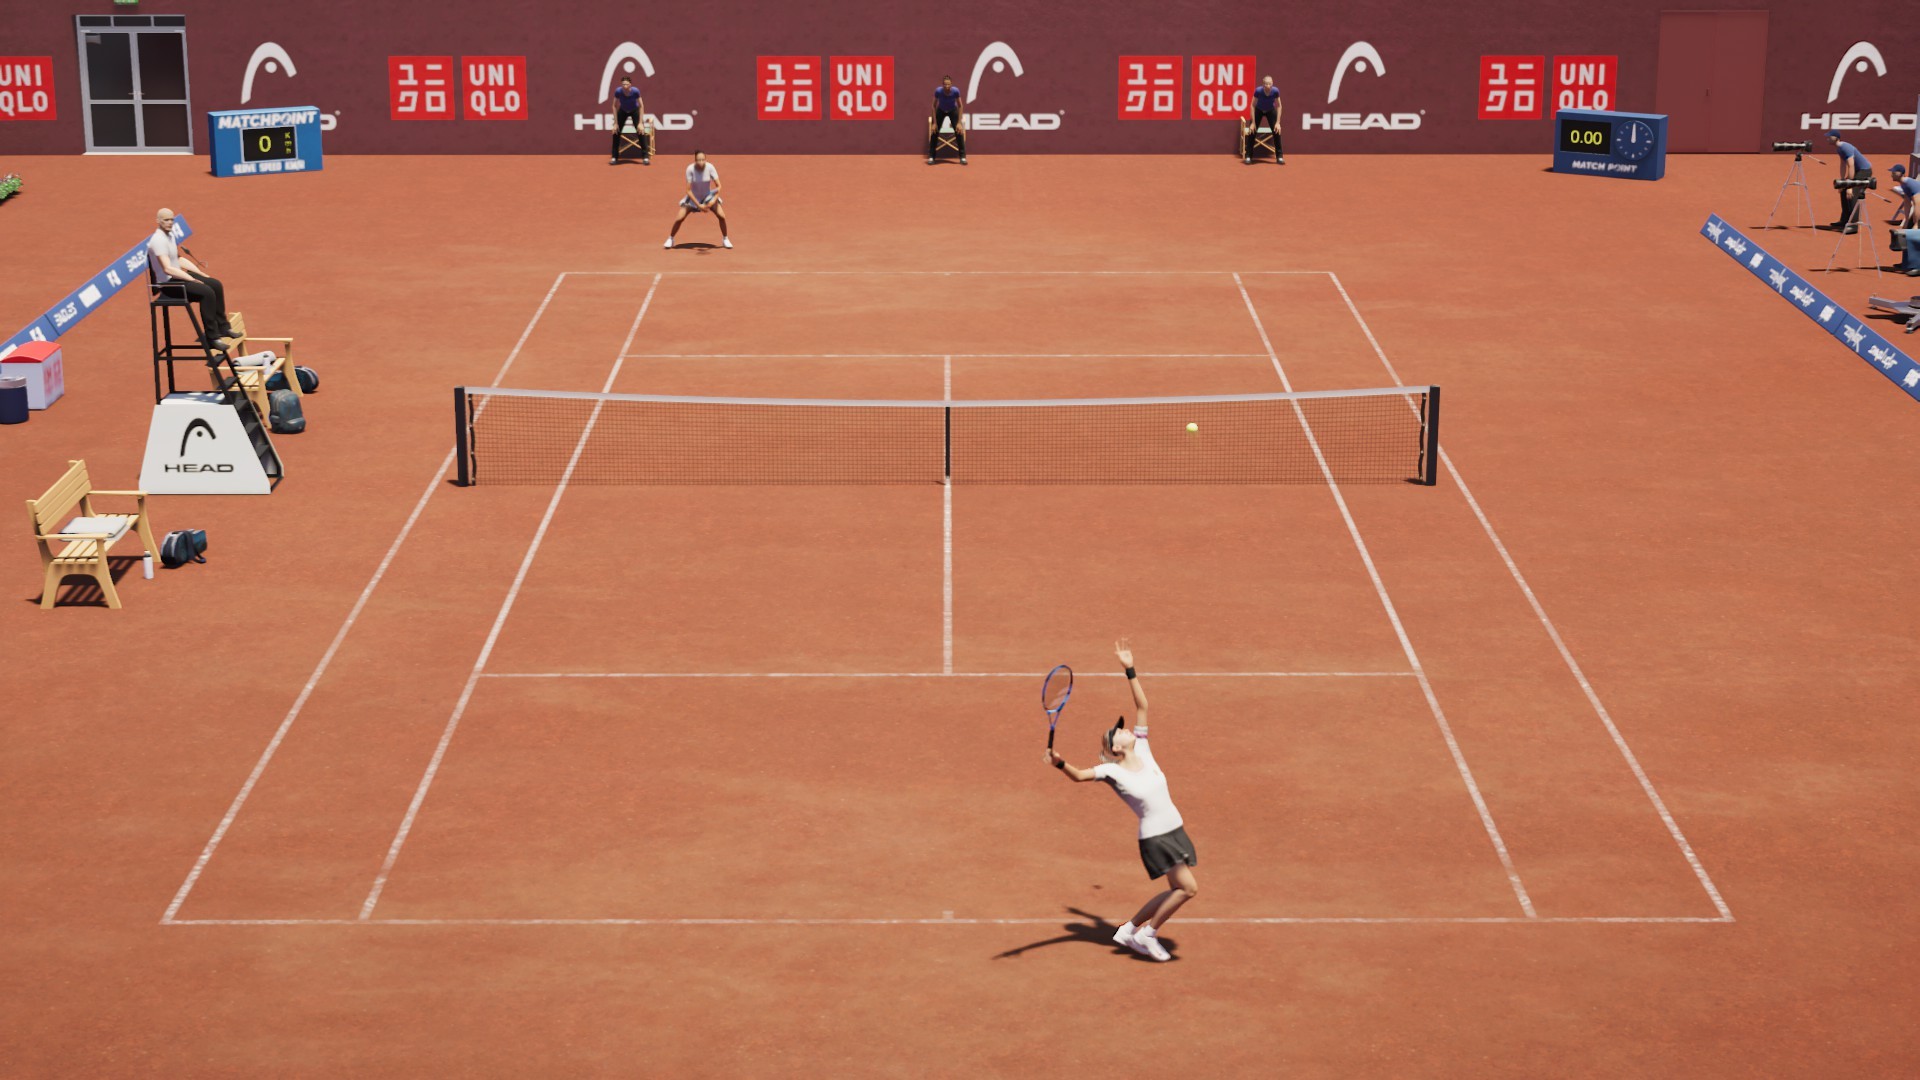 Matchpoint - Tennis Championships on Steam